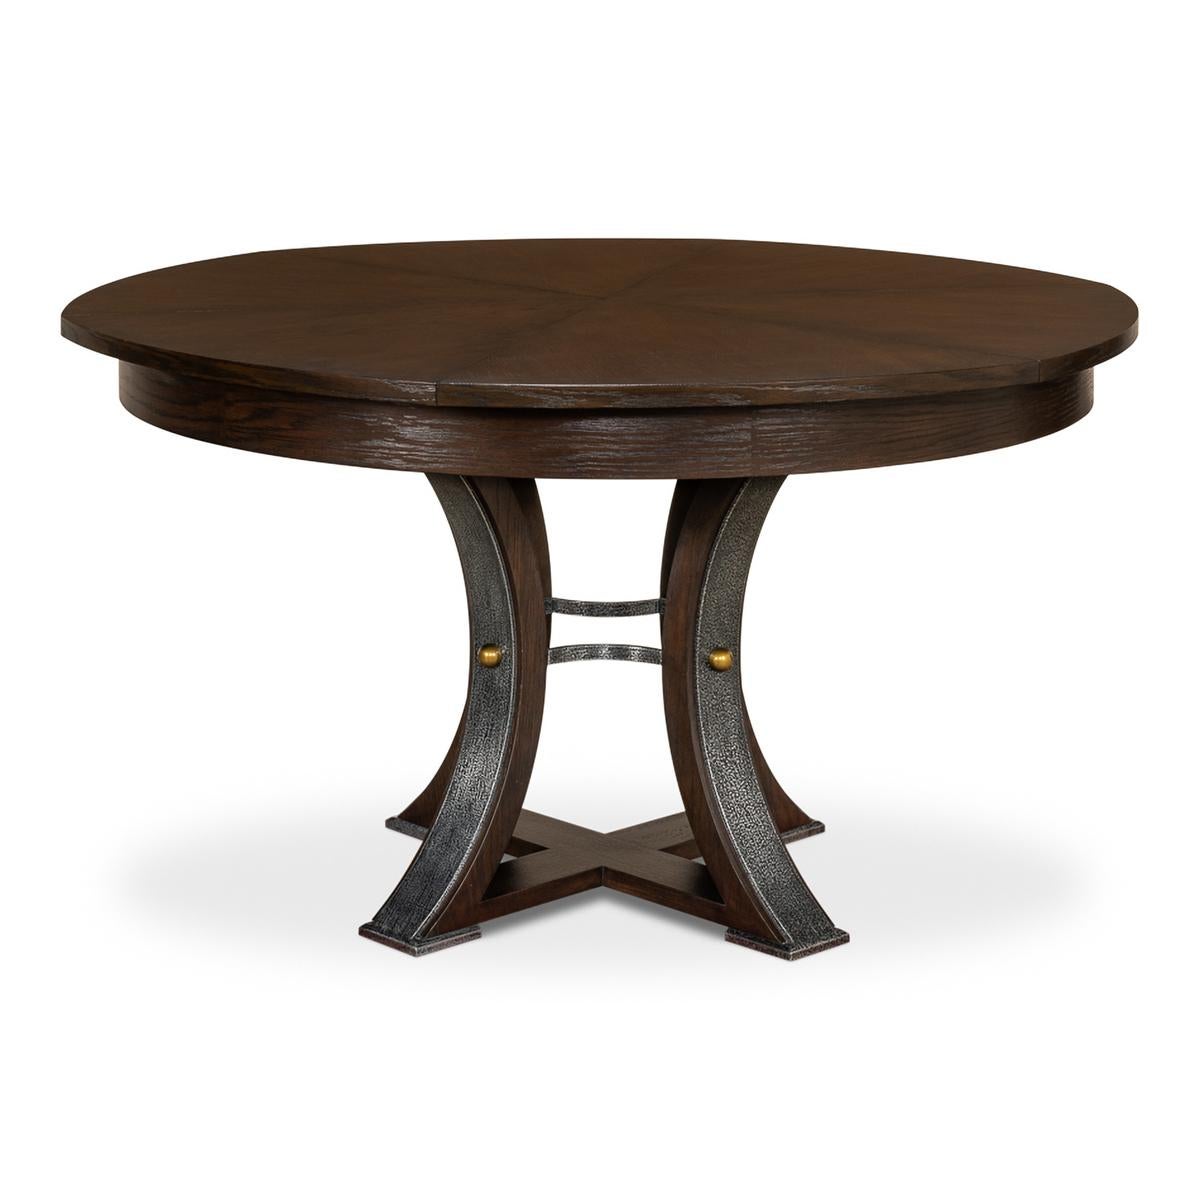 A modern industrial style round extending dining room table. Wire brushed oak top in our Burnt Brown finish with gunmetal iron accents to the simple geometric form base. The table opens and extends to 70